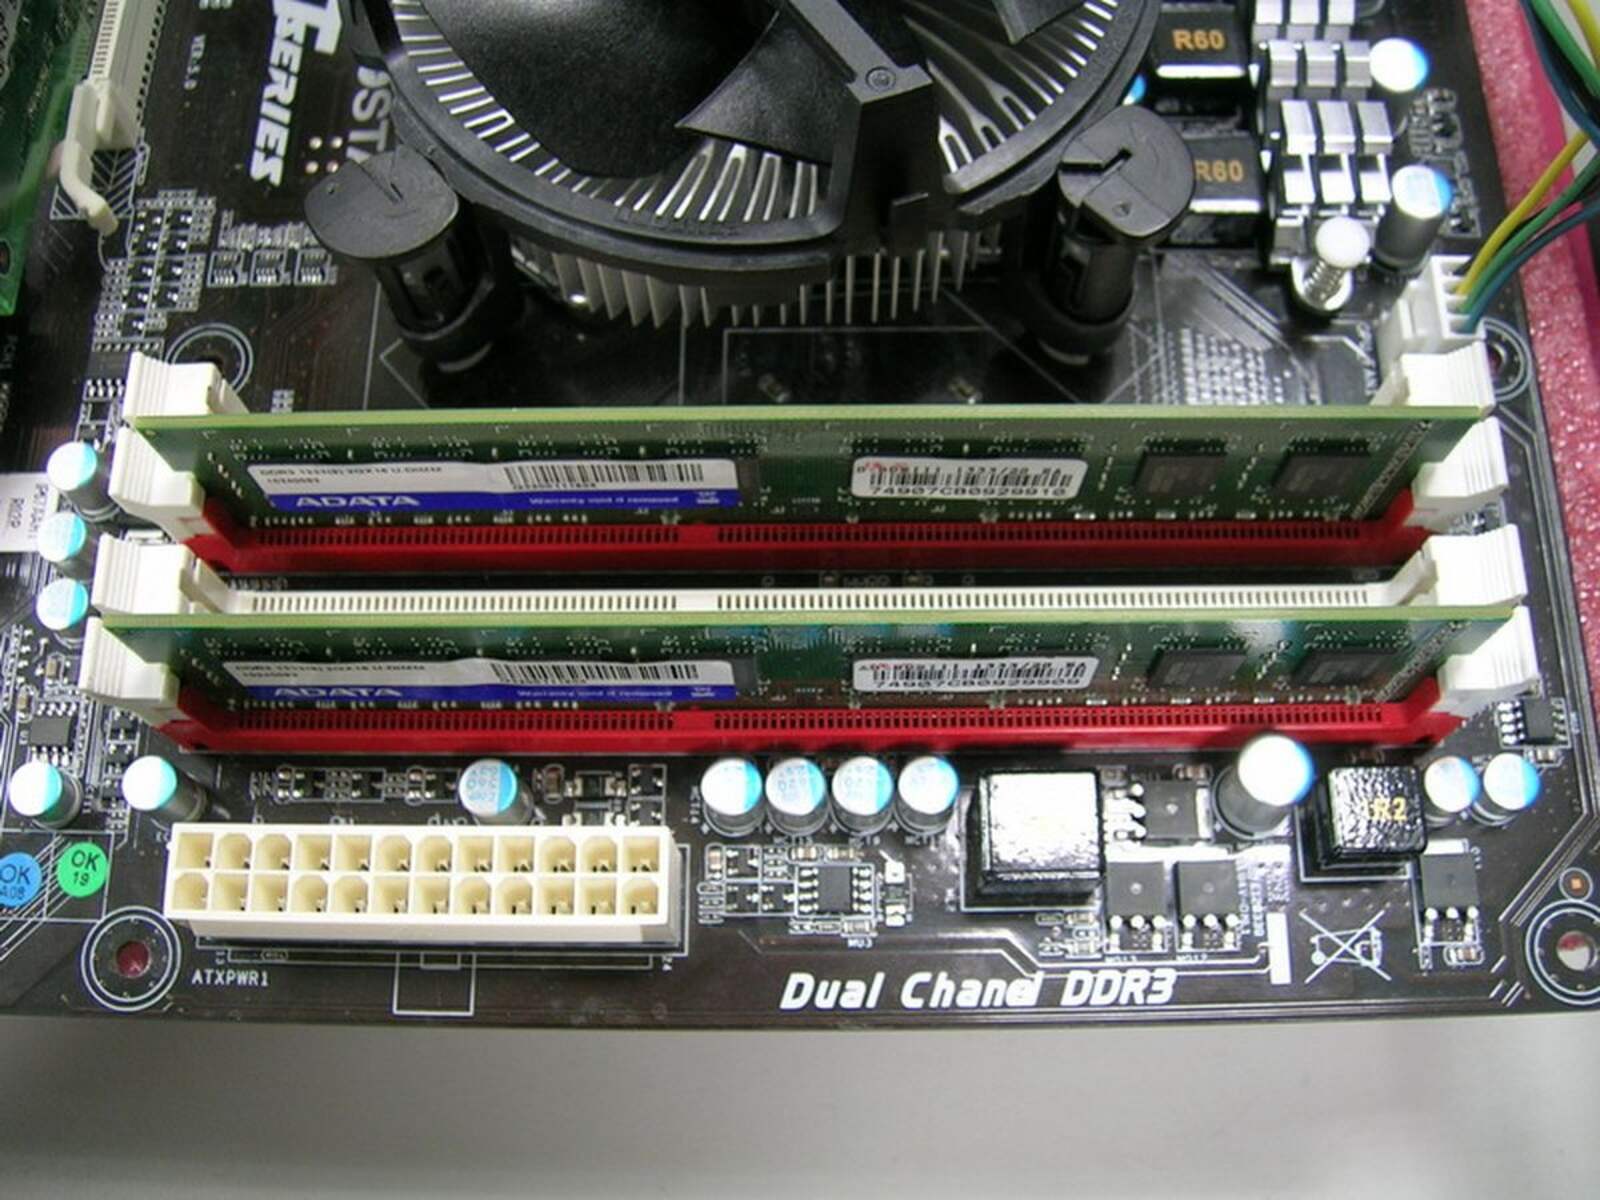 How To Tell If Your RAM Is Dual Channel